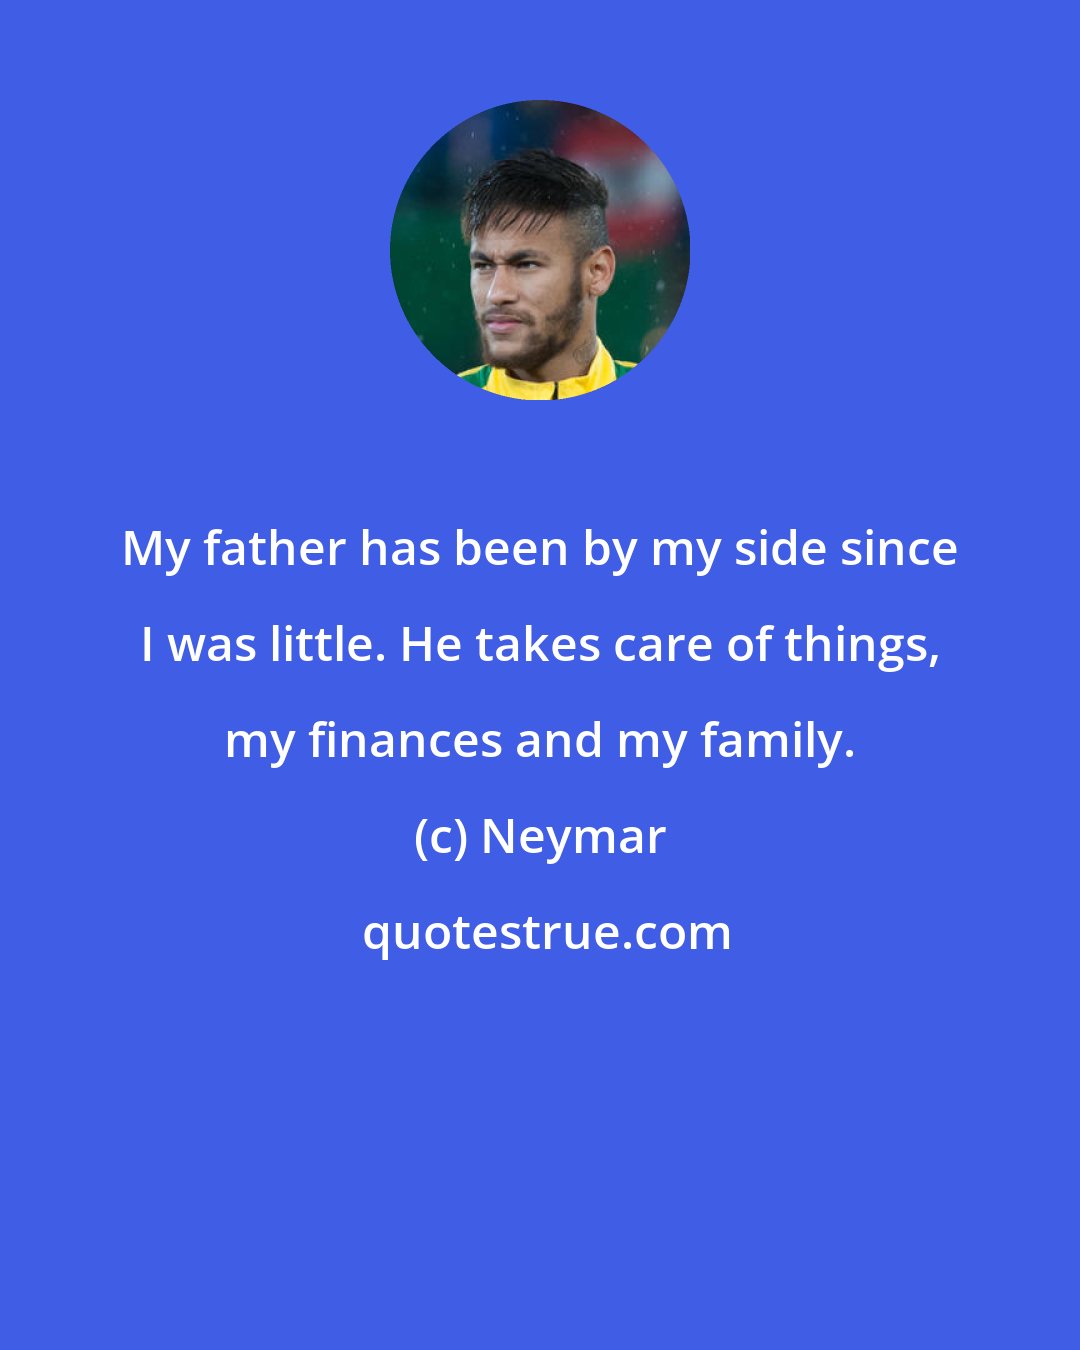 Neymar: My father has been by my side since I was little. He takes care of things, my finances and my family.